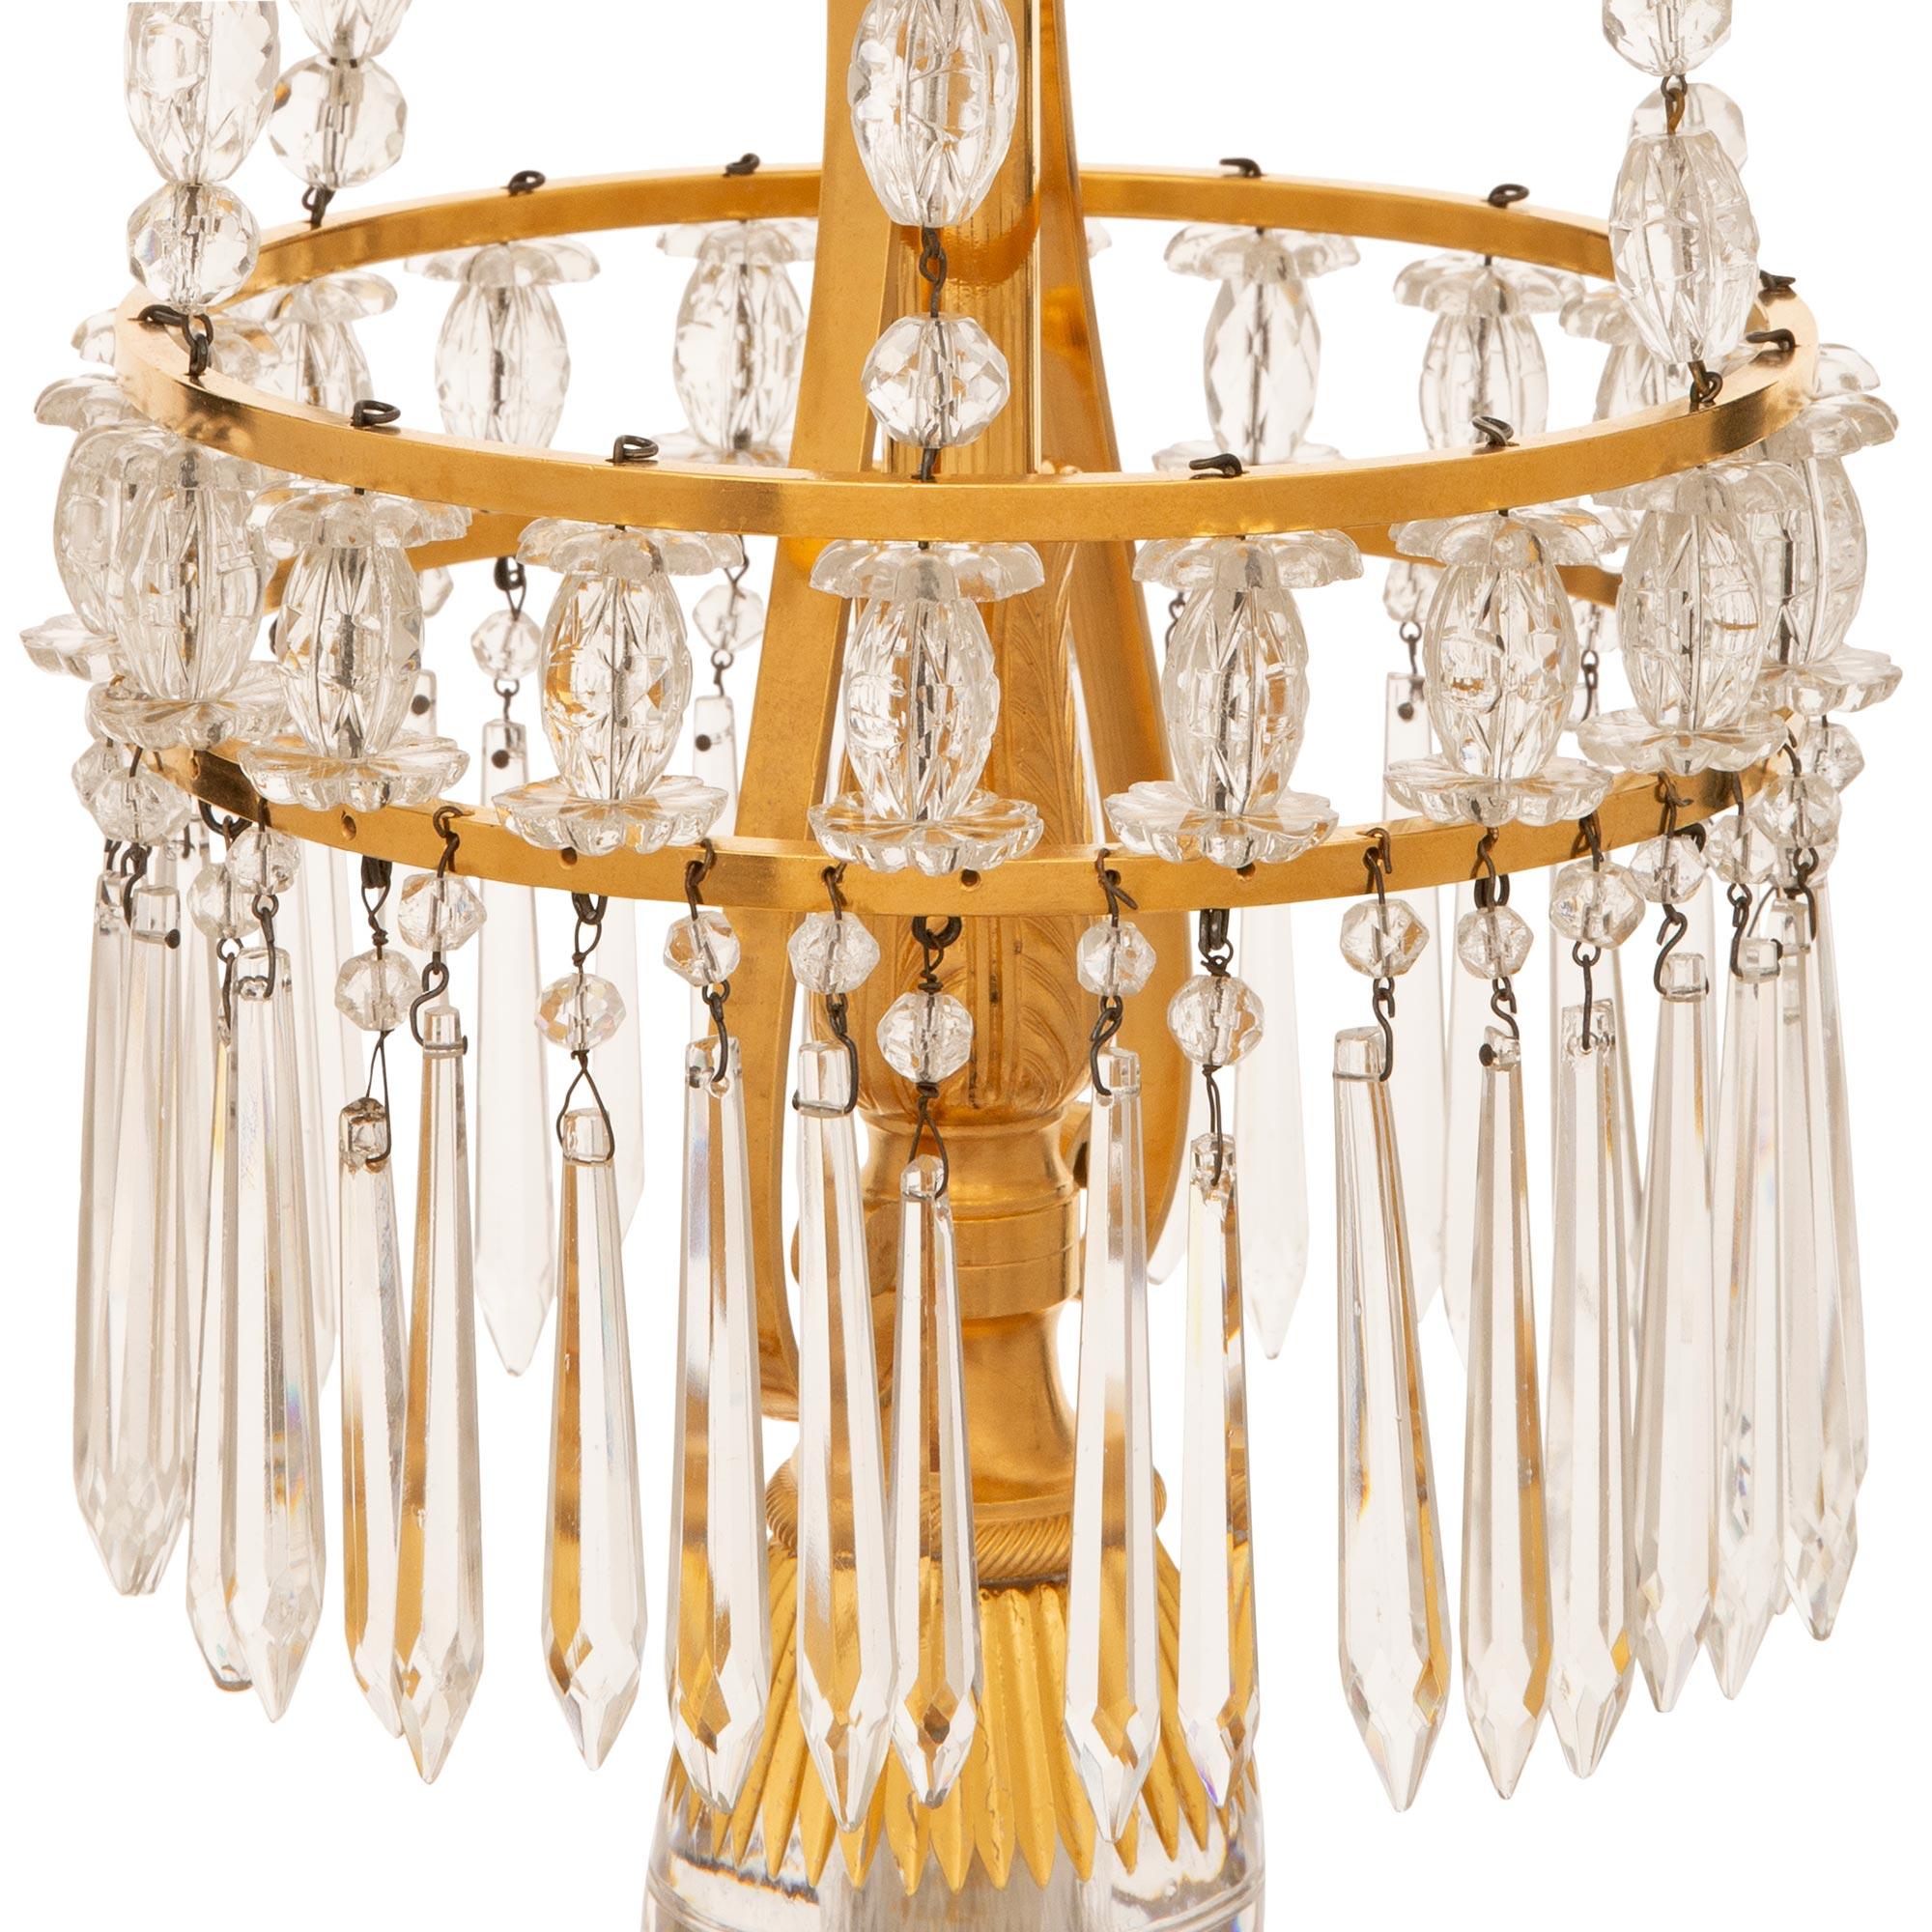 Russian 19th c. Neo-Classical St. Crystal, Ormolu, Bronze & Glass Chandelier In Good Condition For Sale In West Palm Beach, FL